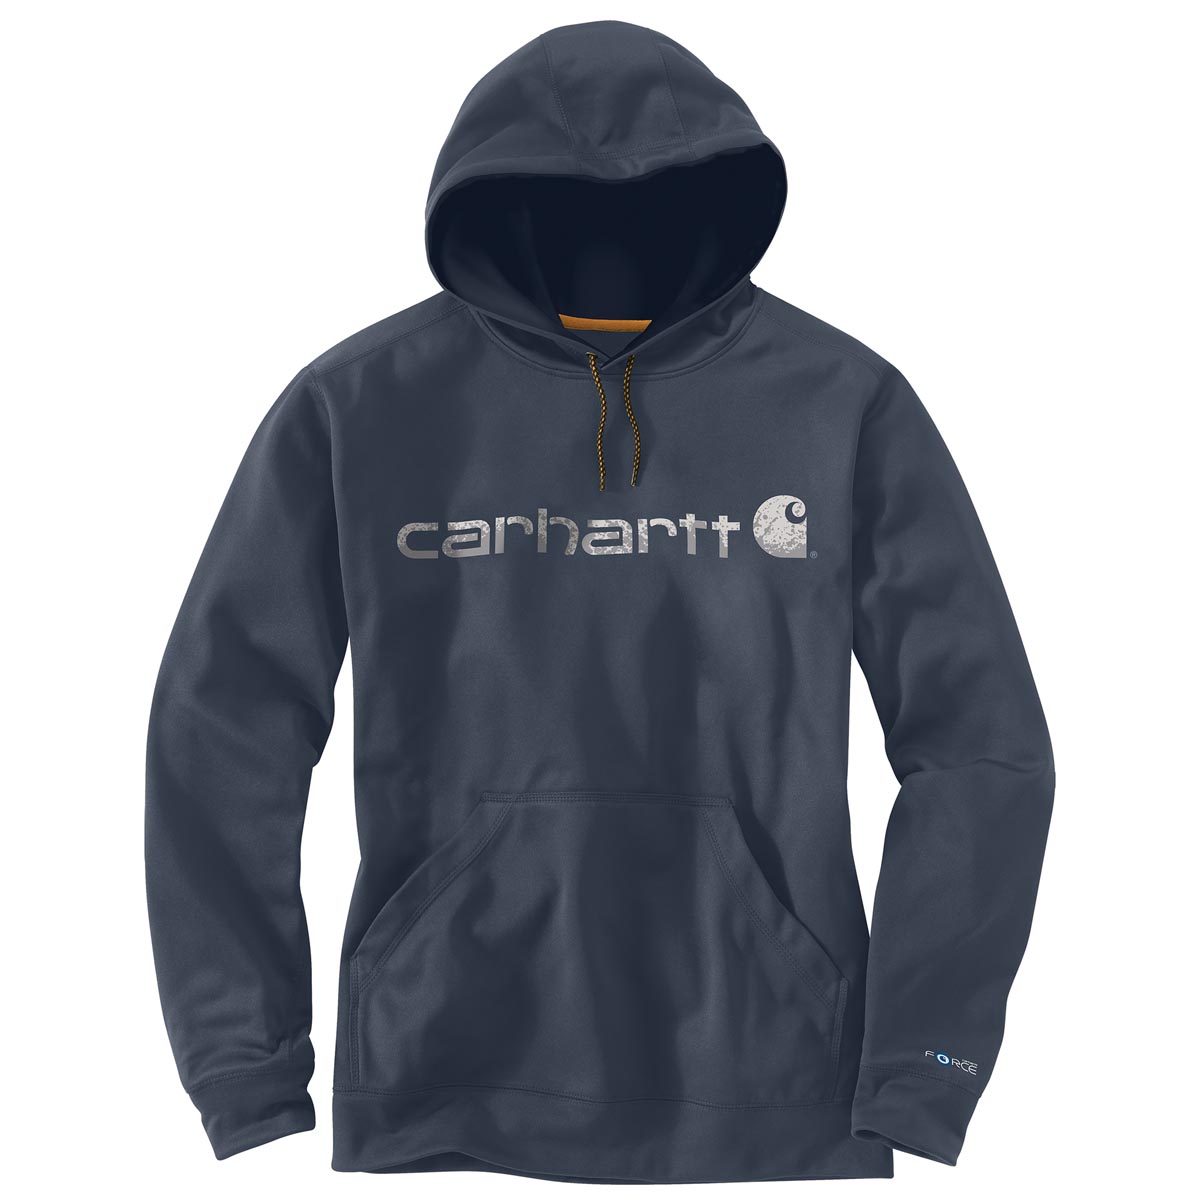 Carhartt Men's Force Extremes Signature Graphic Hooded Sweatshirt Discontinued Pricing